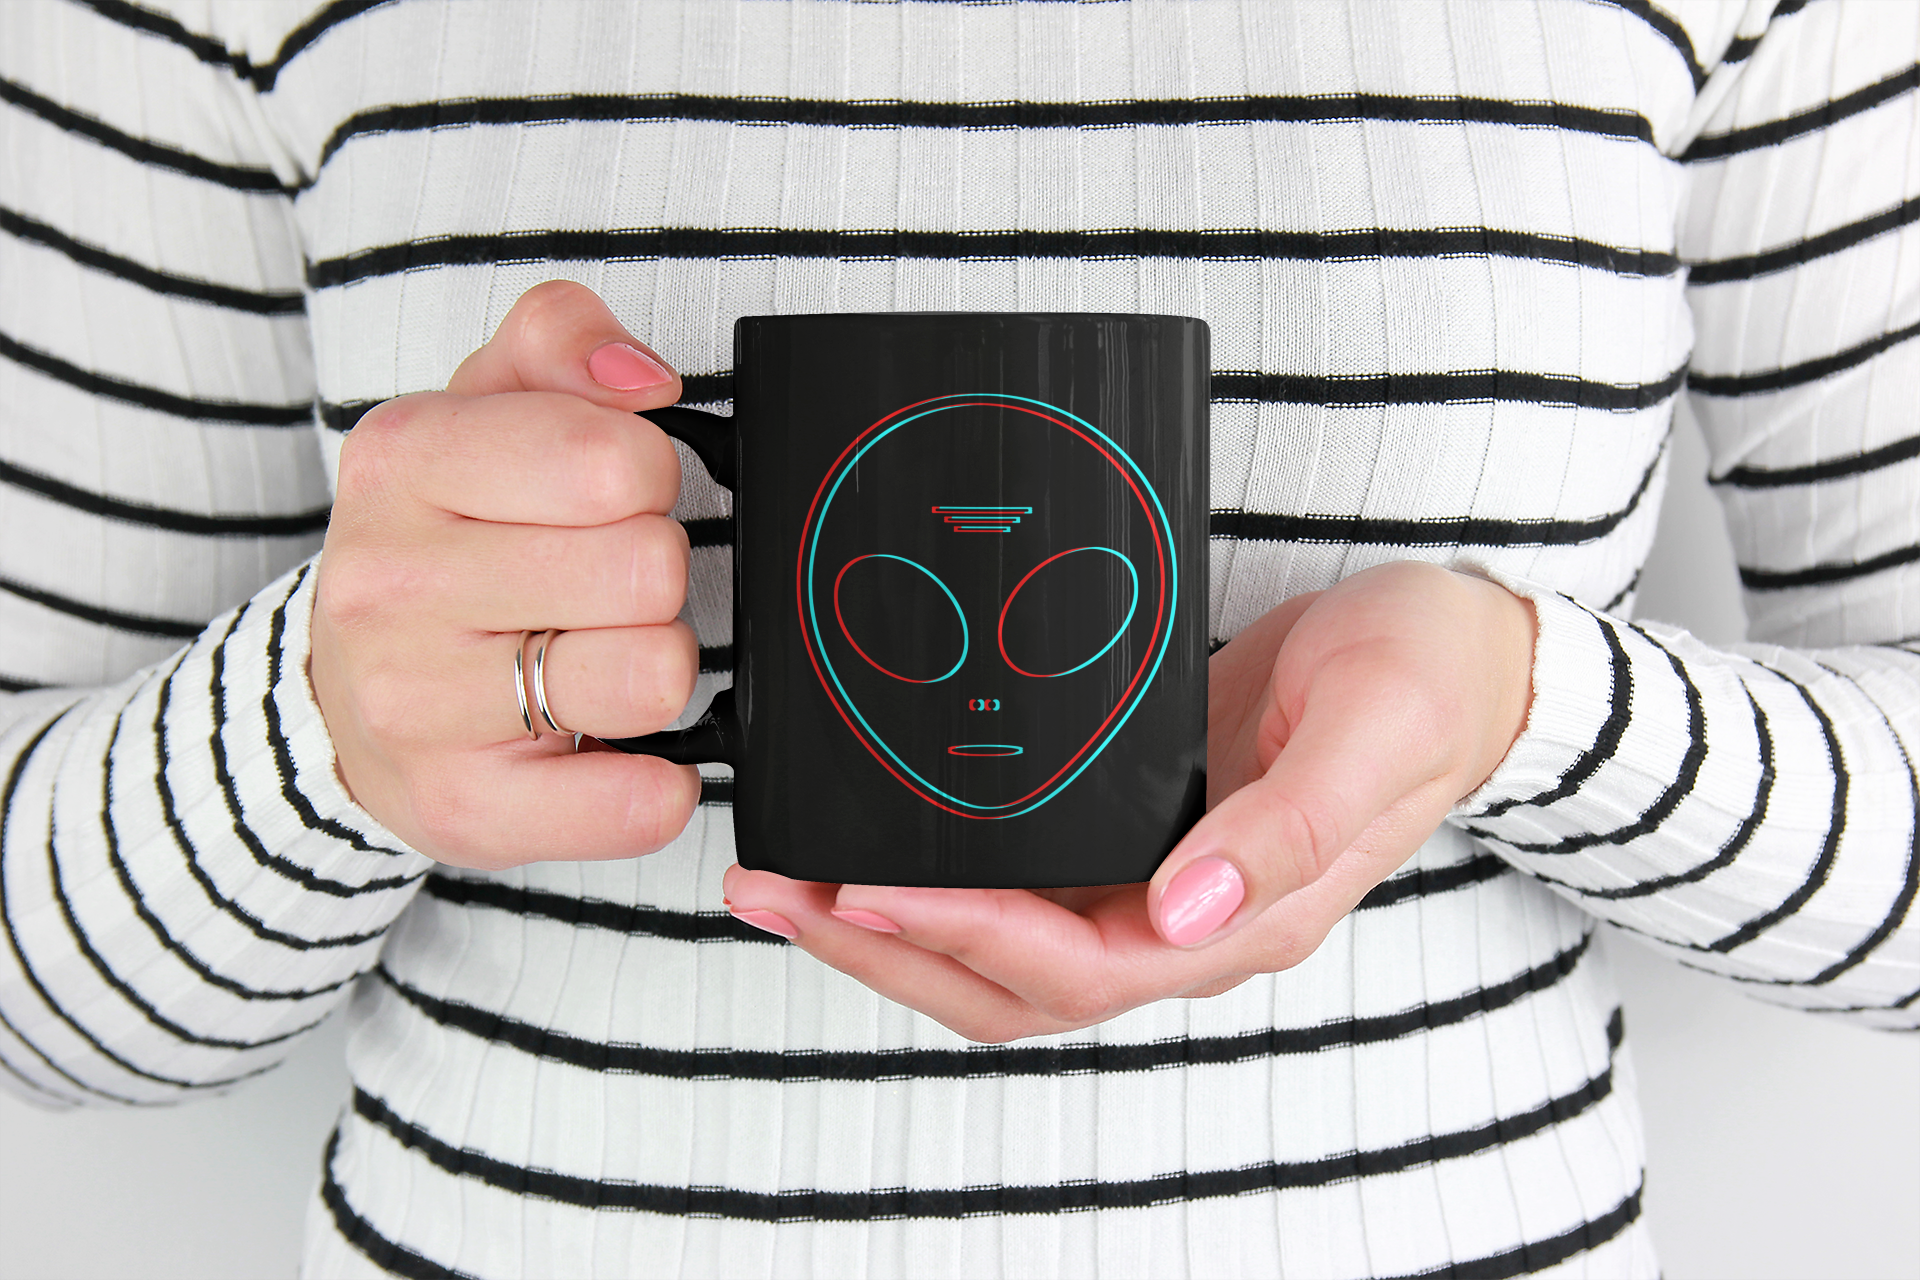 Alien Head Black Mug is from out of this world